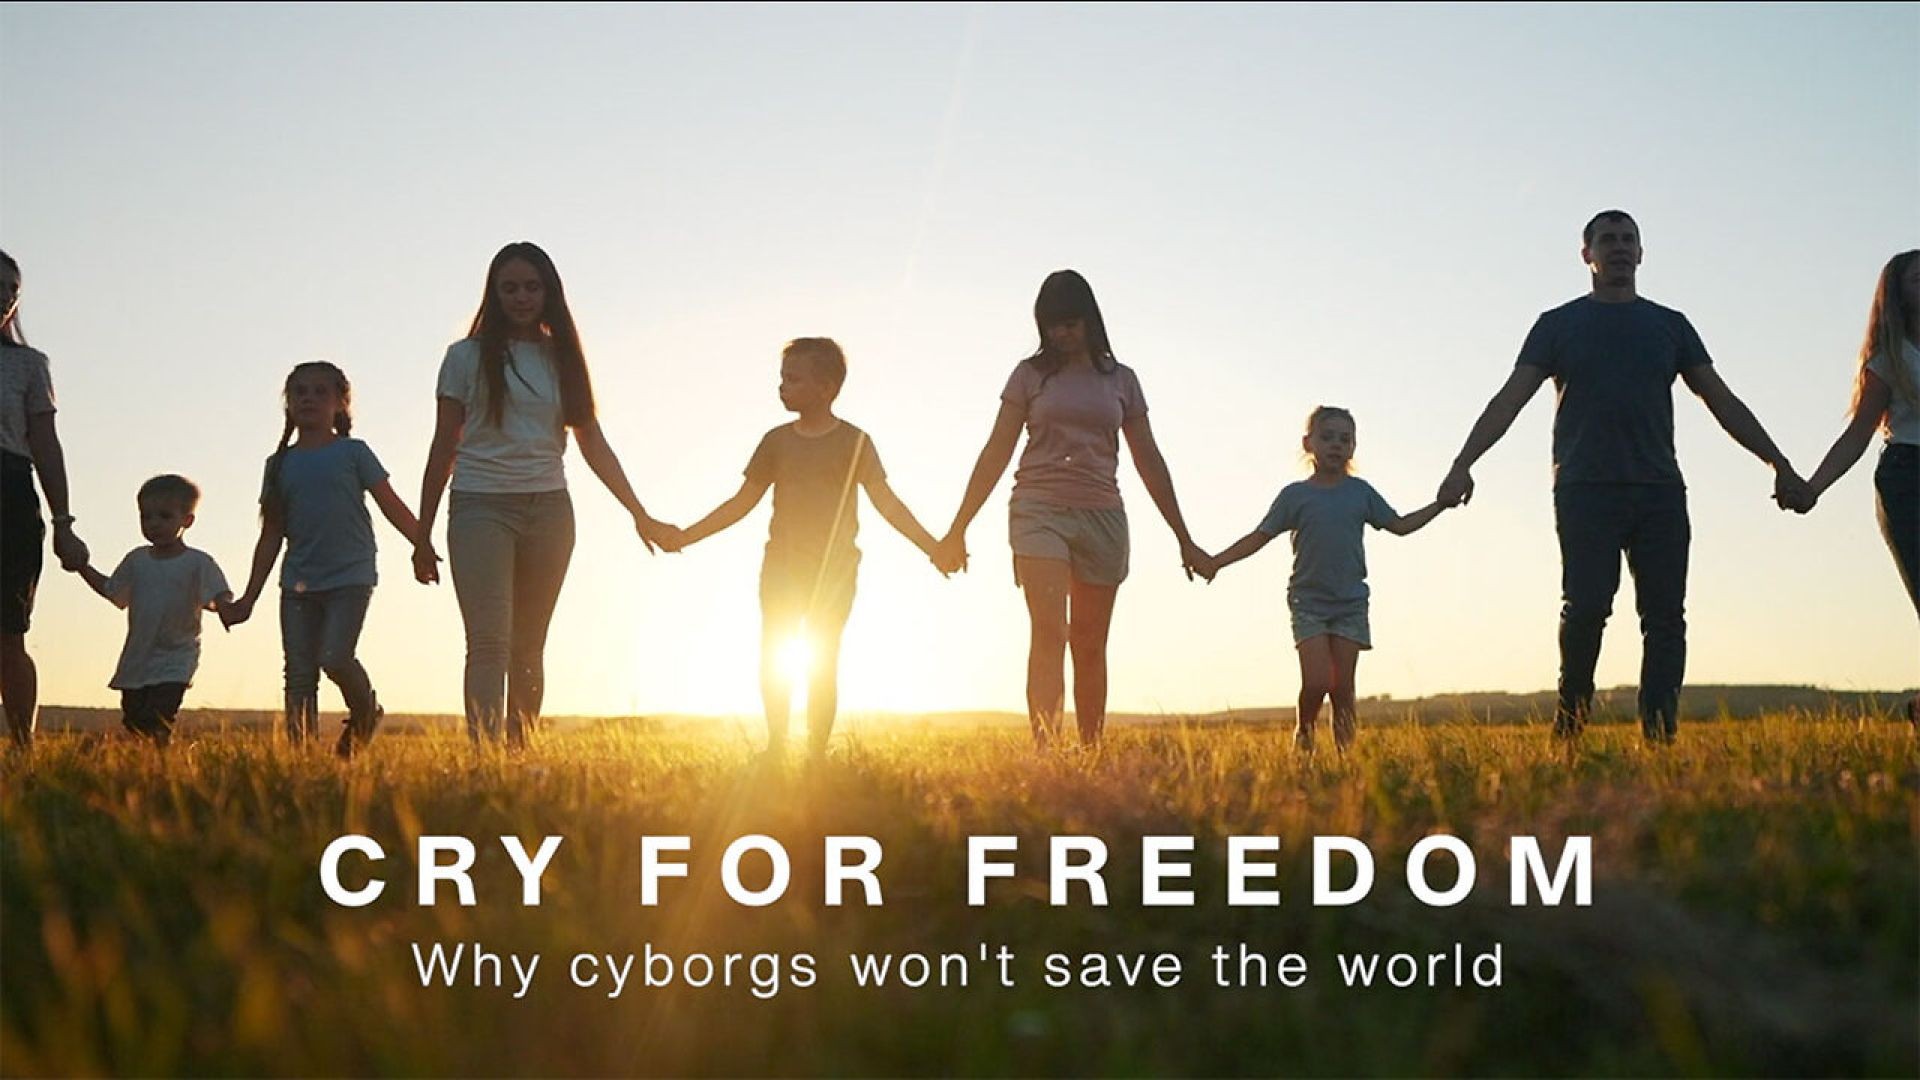 CRY FOR FREEDOM - Why cyborgs won't save the world